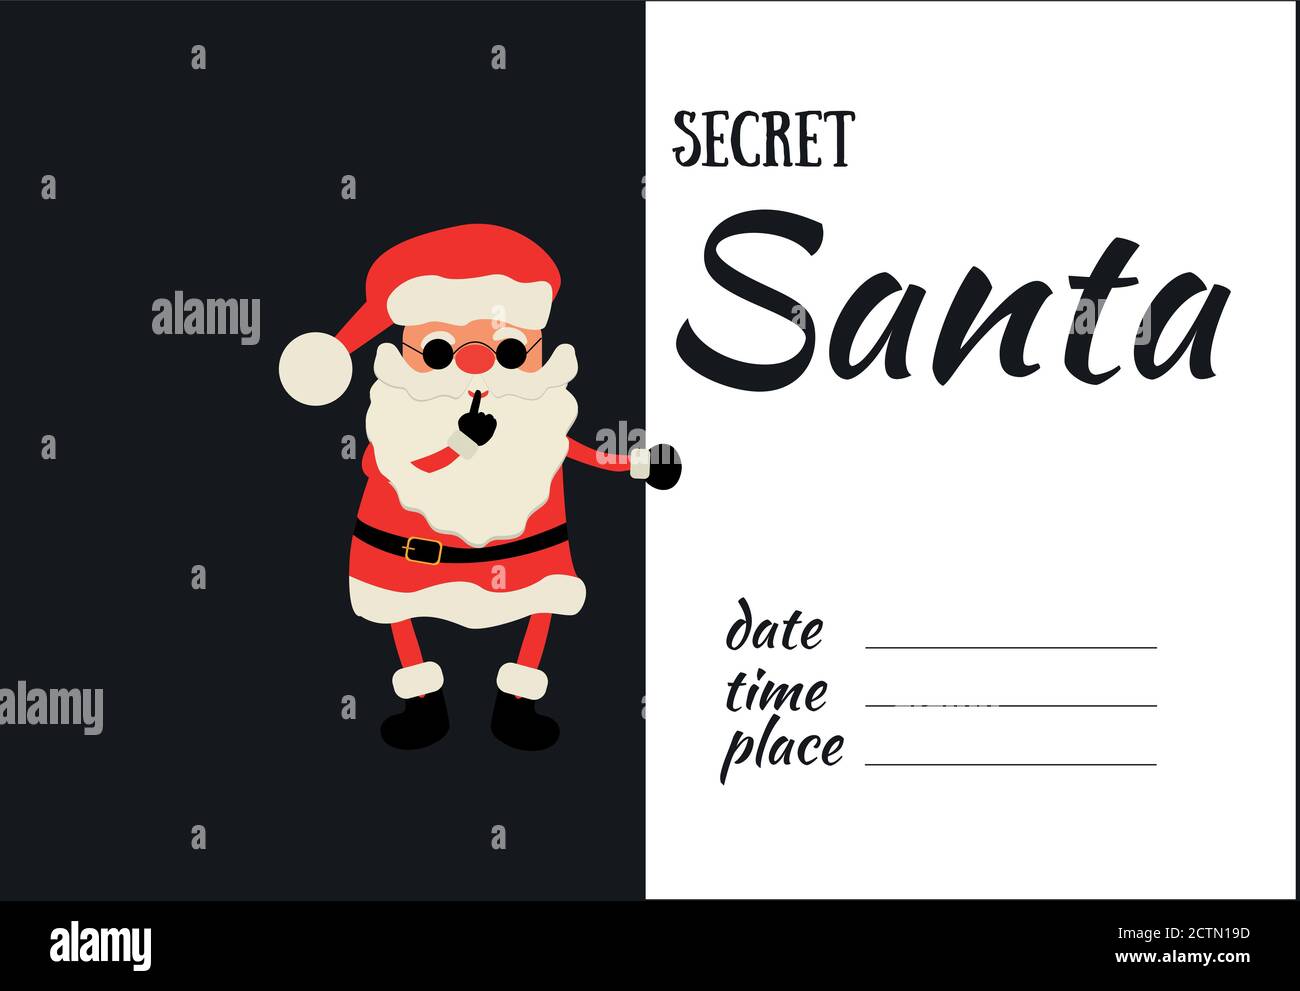 Secret Santa Claus invitation background with cartoon Santa Claus peeking out from behind the poster. vector illustration. Stock Vector